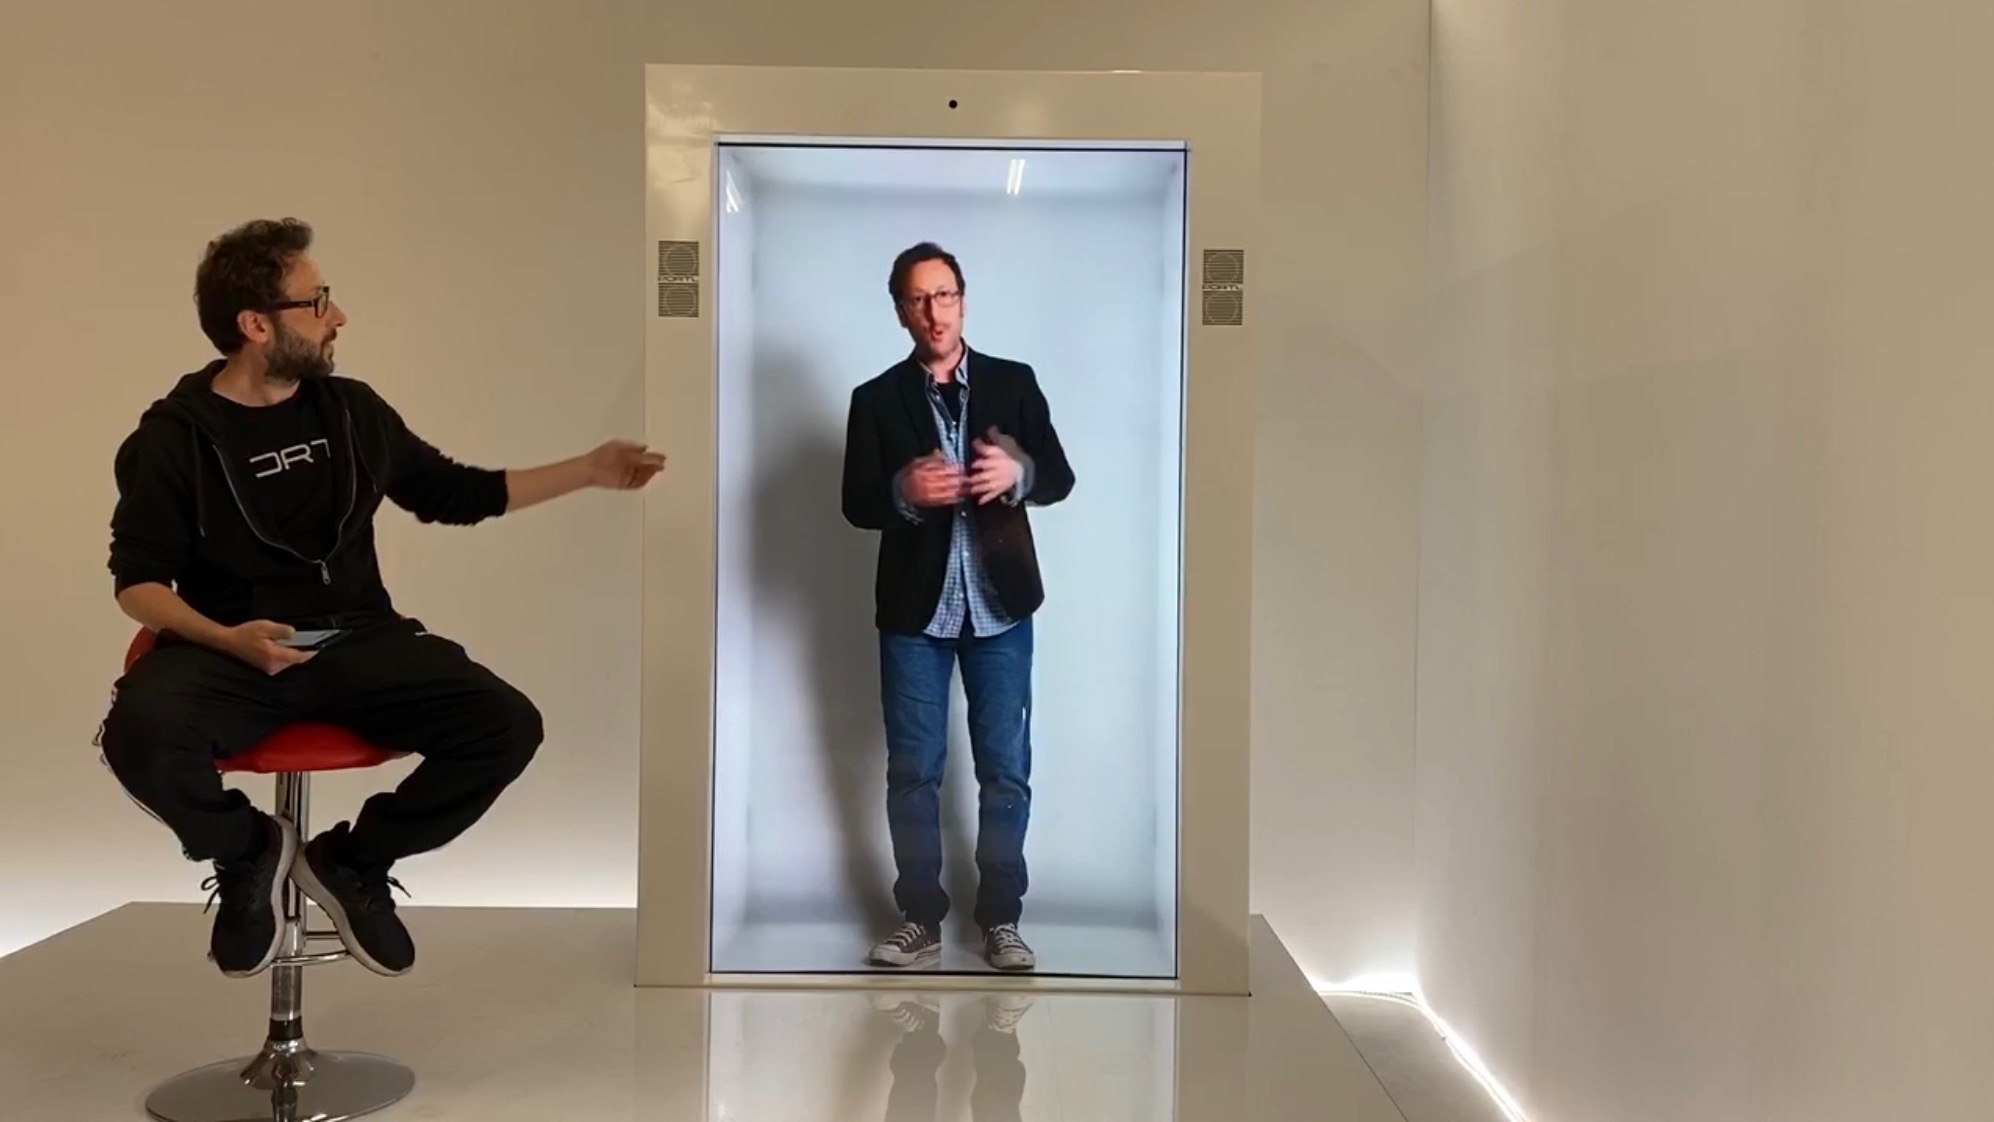 The Epic PORTL Hologram Machine powered by StoryFile's A.I. allows visitors to converse with life-like holograms. 